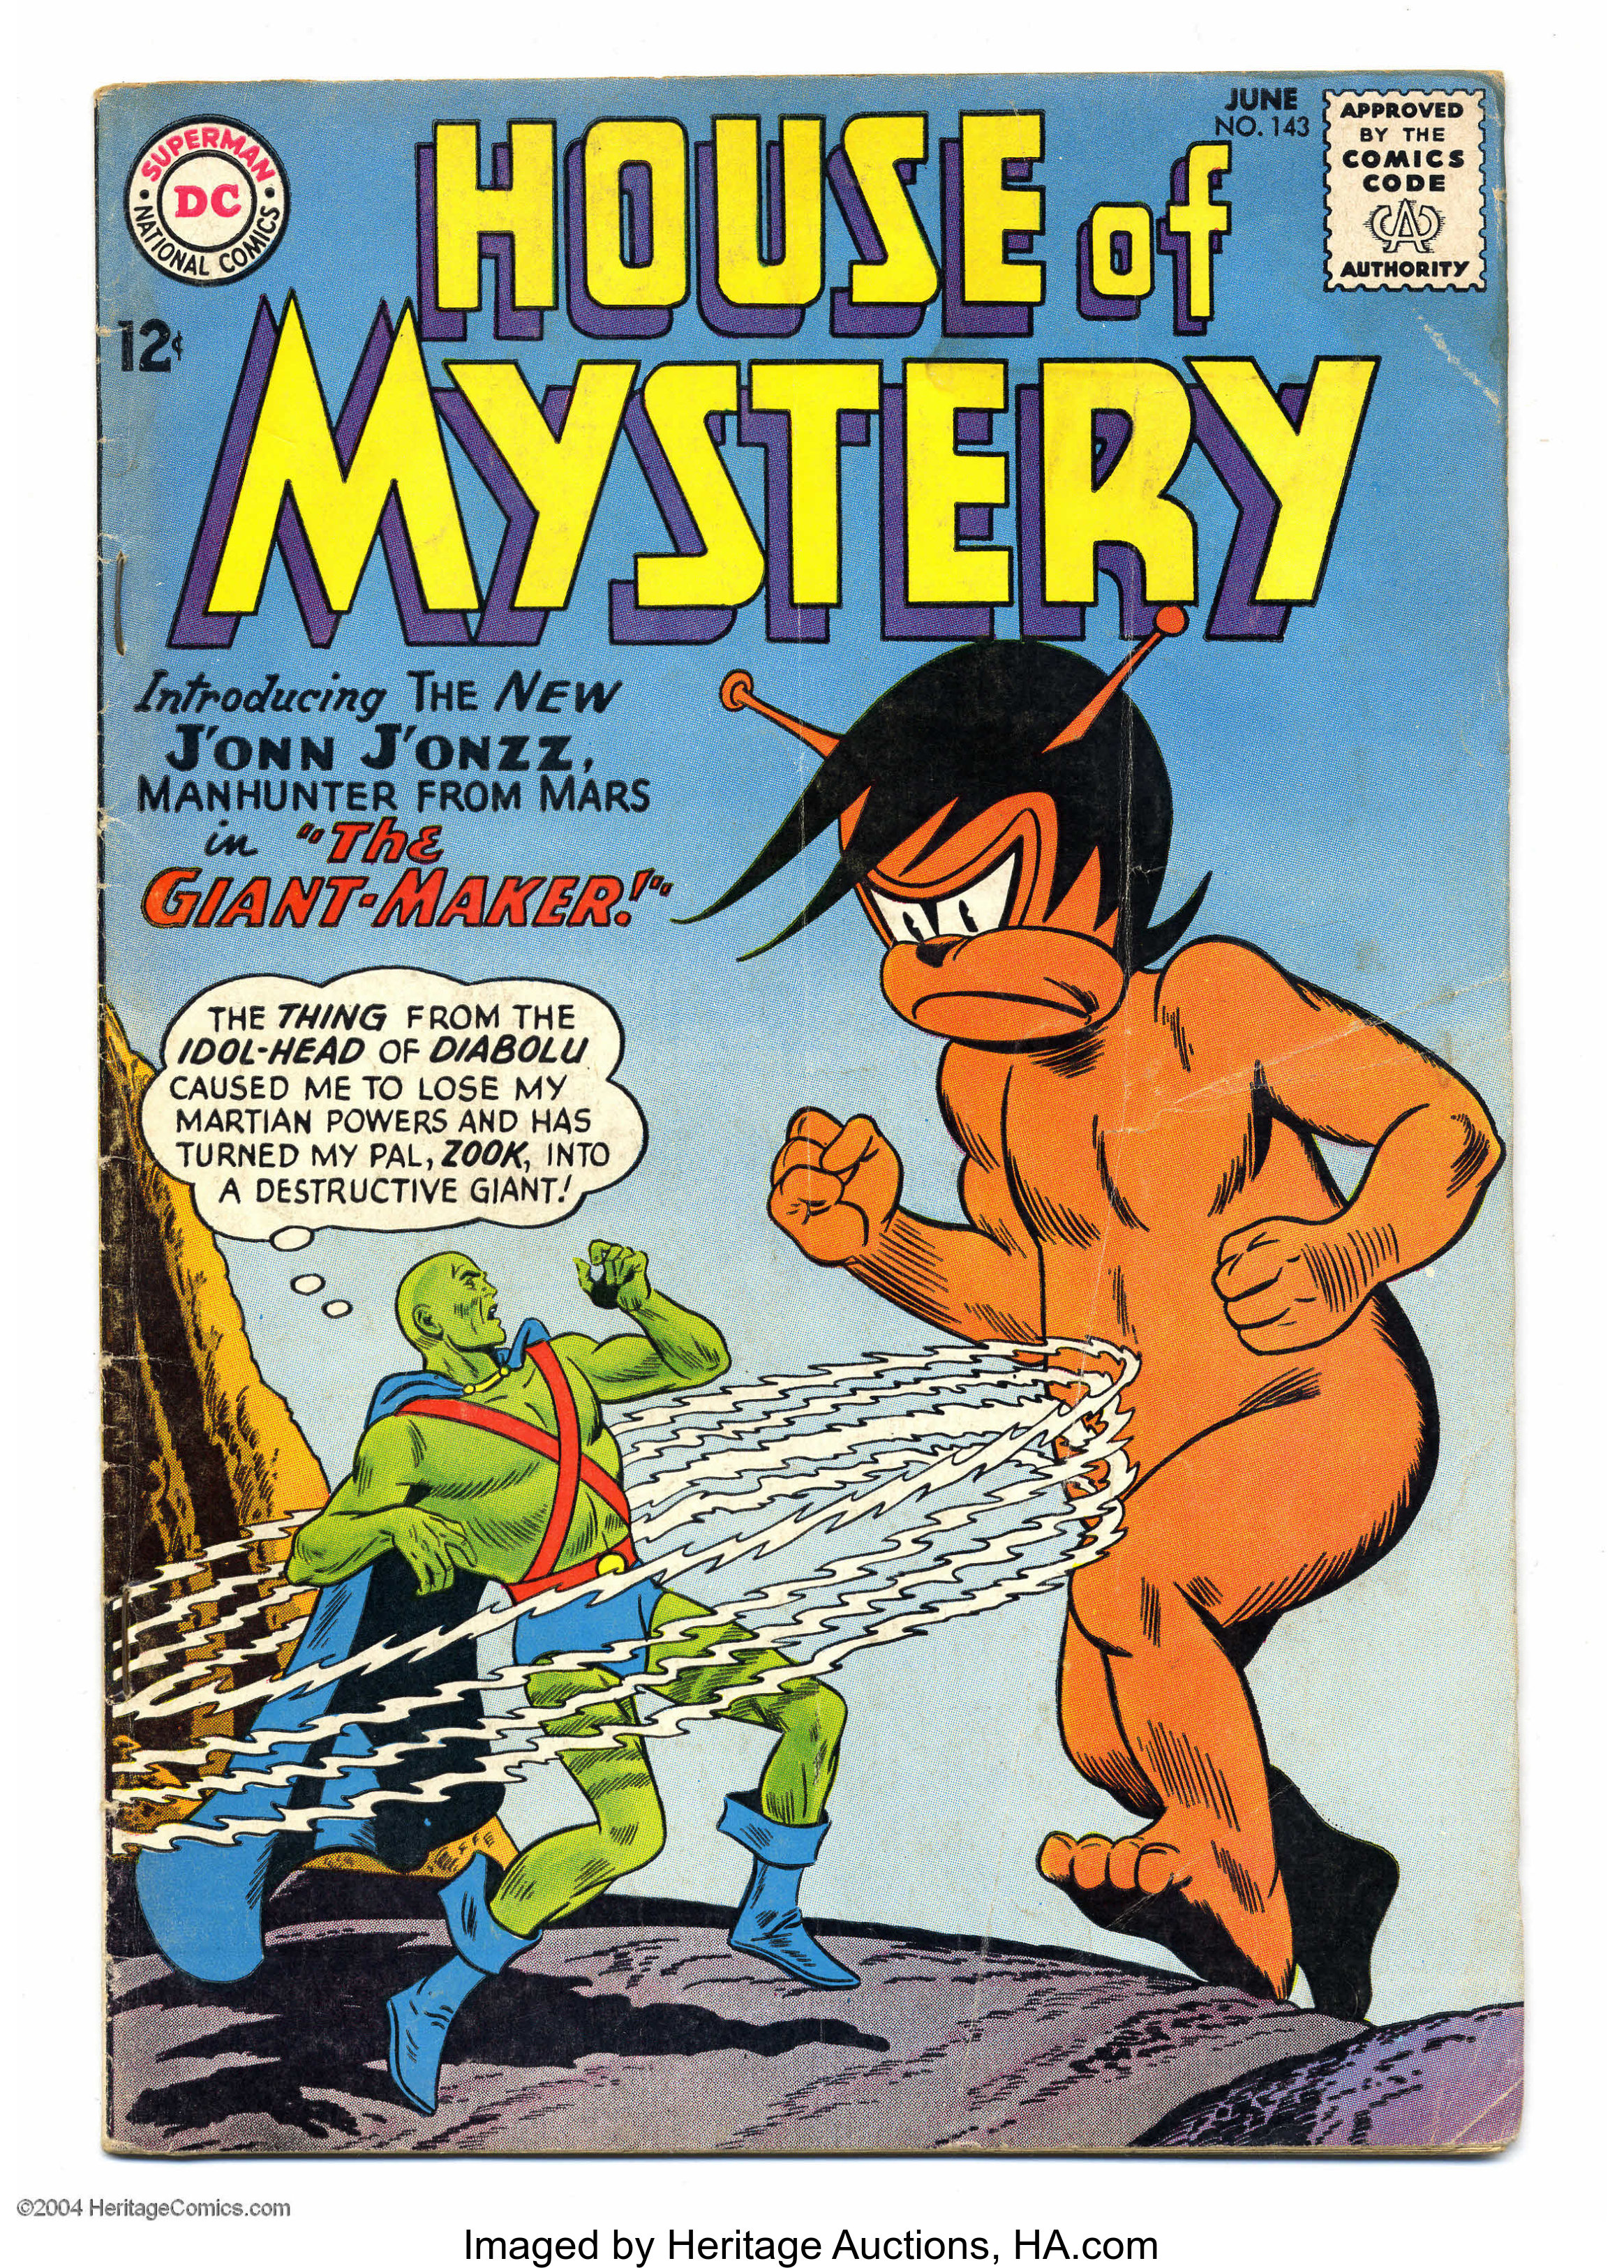 House Of Mystery 143 Dc 1964 Condition Vg J Onn J Onzz Lot Heritage Auctions